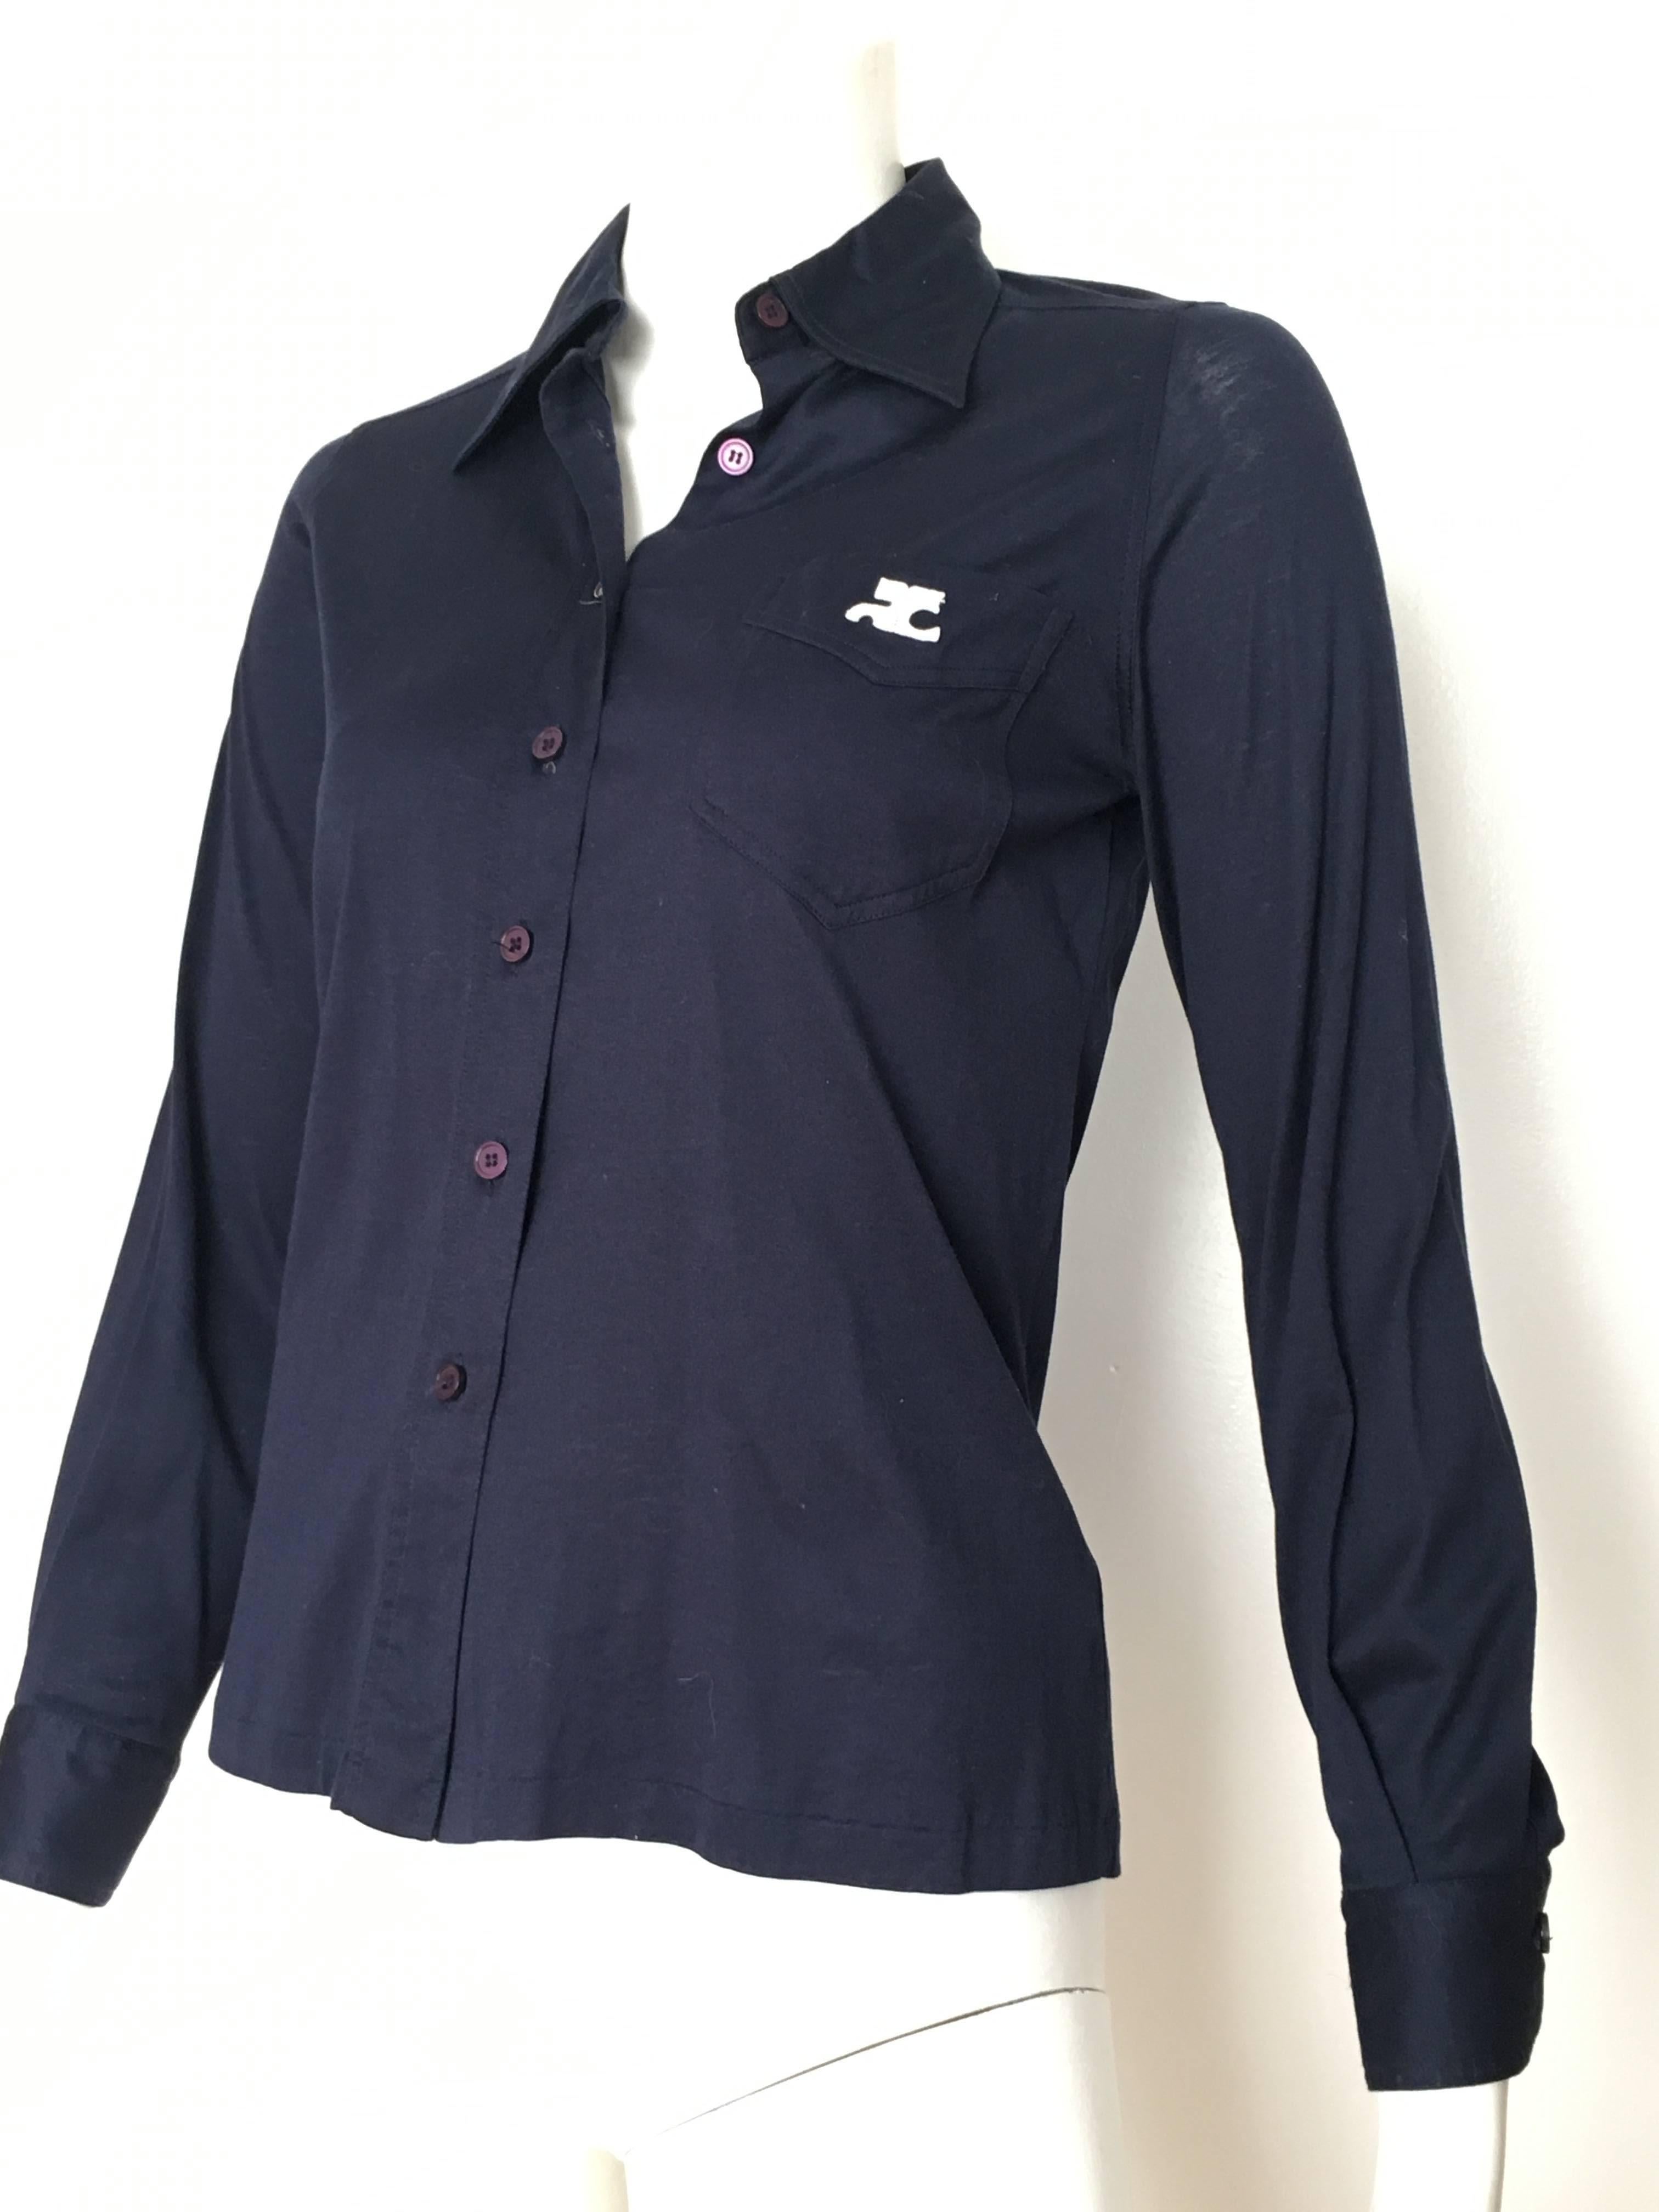 Courreges 1980s navy stretch cotton button up blouse is an USA size 4.  Iconic logo on front pocket.  Basic and classic this comfortable cotton Courreges blouse will keep hitting those home runs for you... Match this top with your vintage YSL skirt